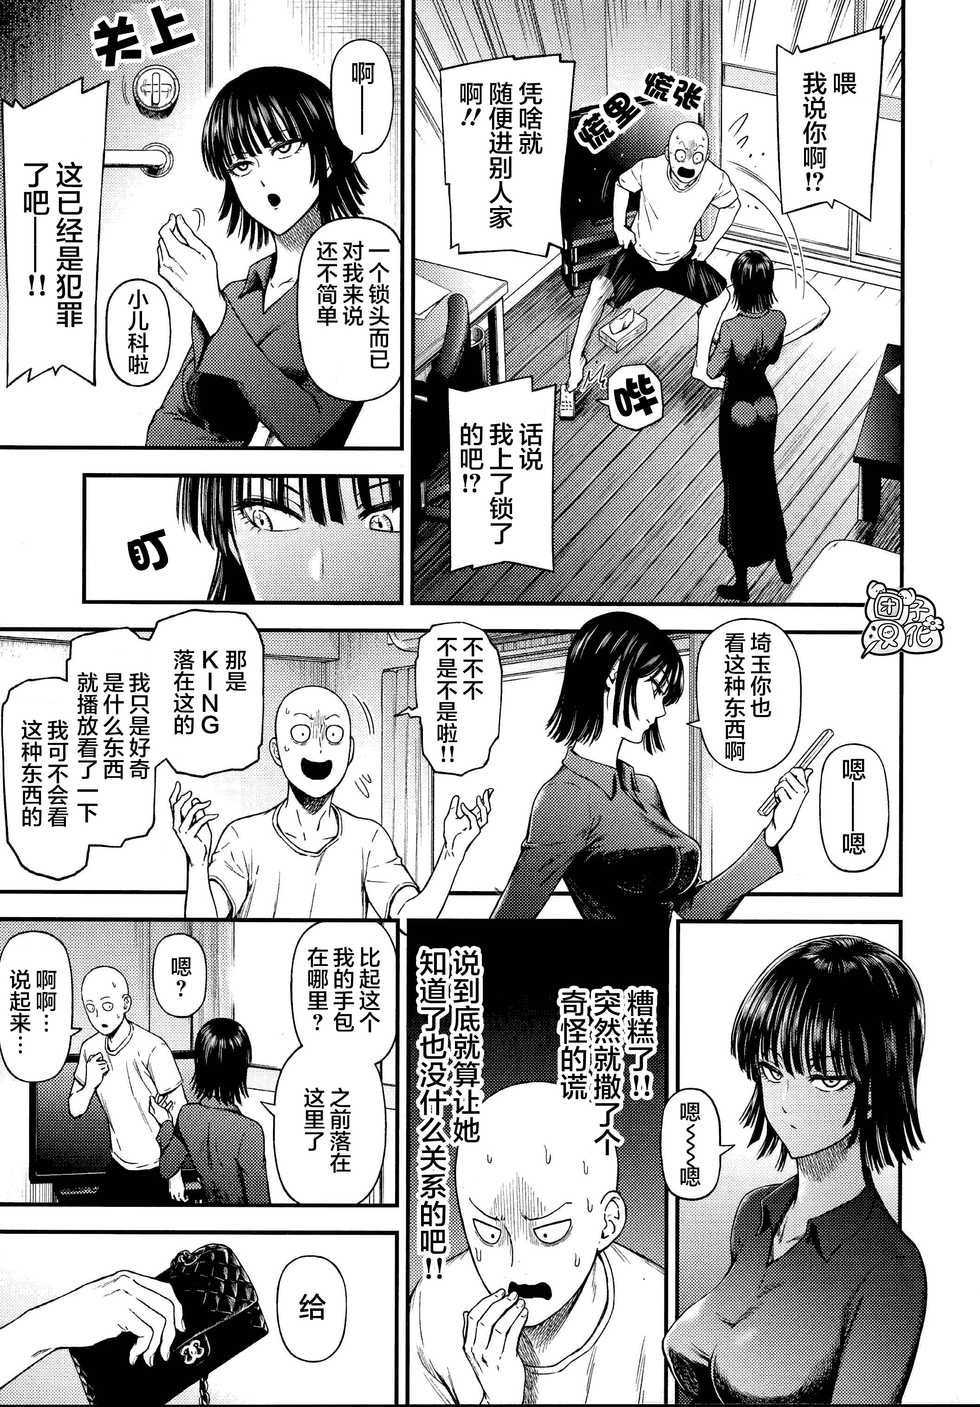 [Kiyosumi Hurricane (Kiyosumi Hurricane)] ONE-HURRICANE 6.5 (One Punch Man) [Chinese] [团子汉化组] - Page 4